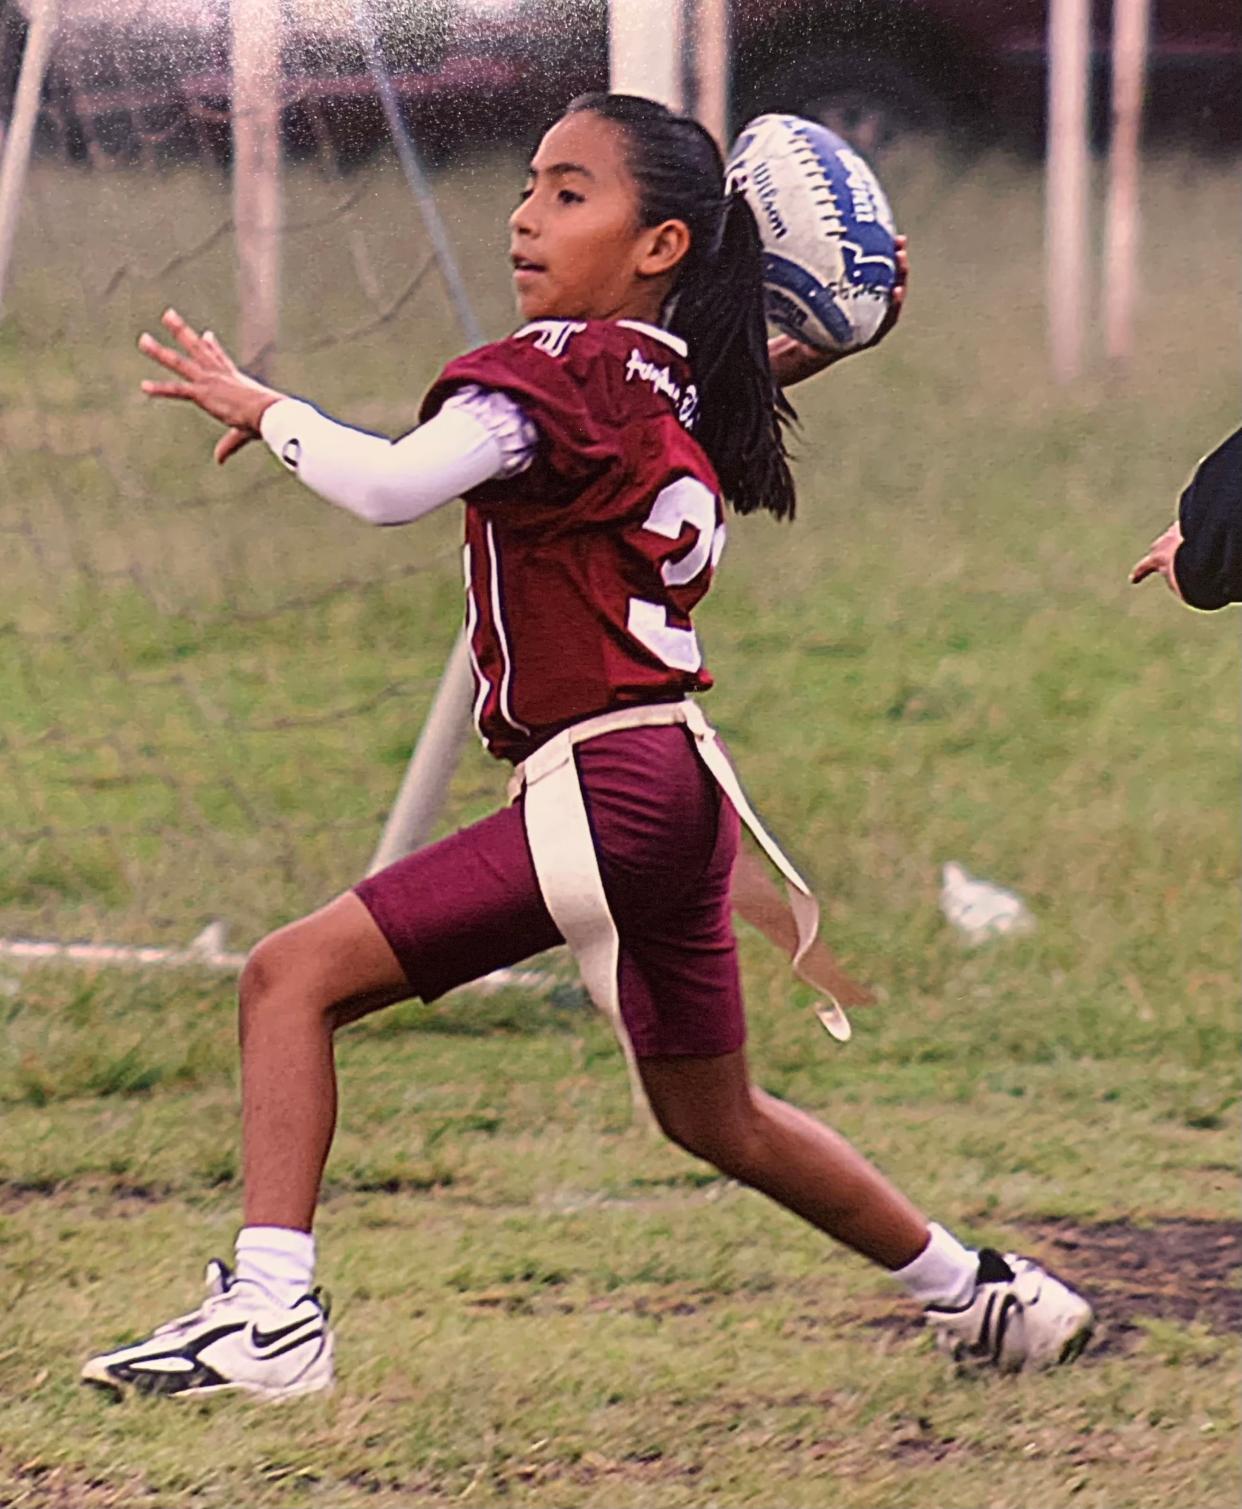 Diana Flores started playing flag football as a child. She's now the quarterback for Mexico women's national team.